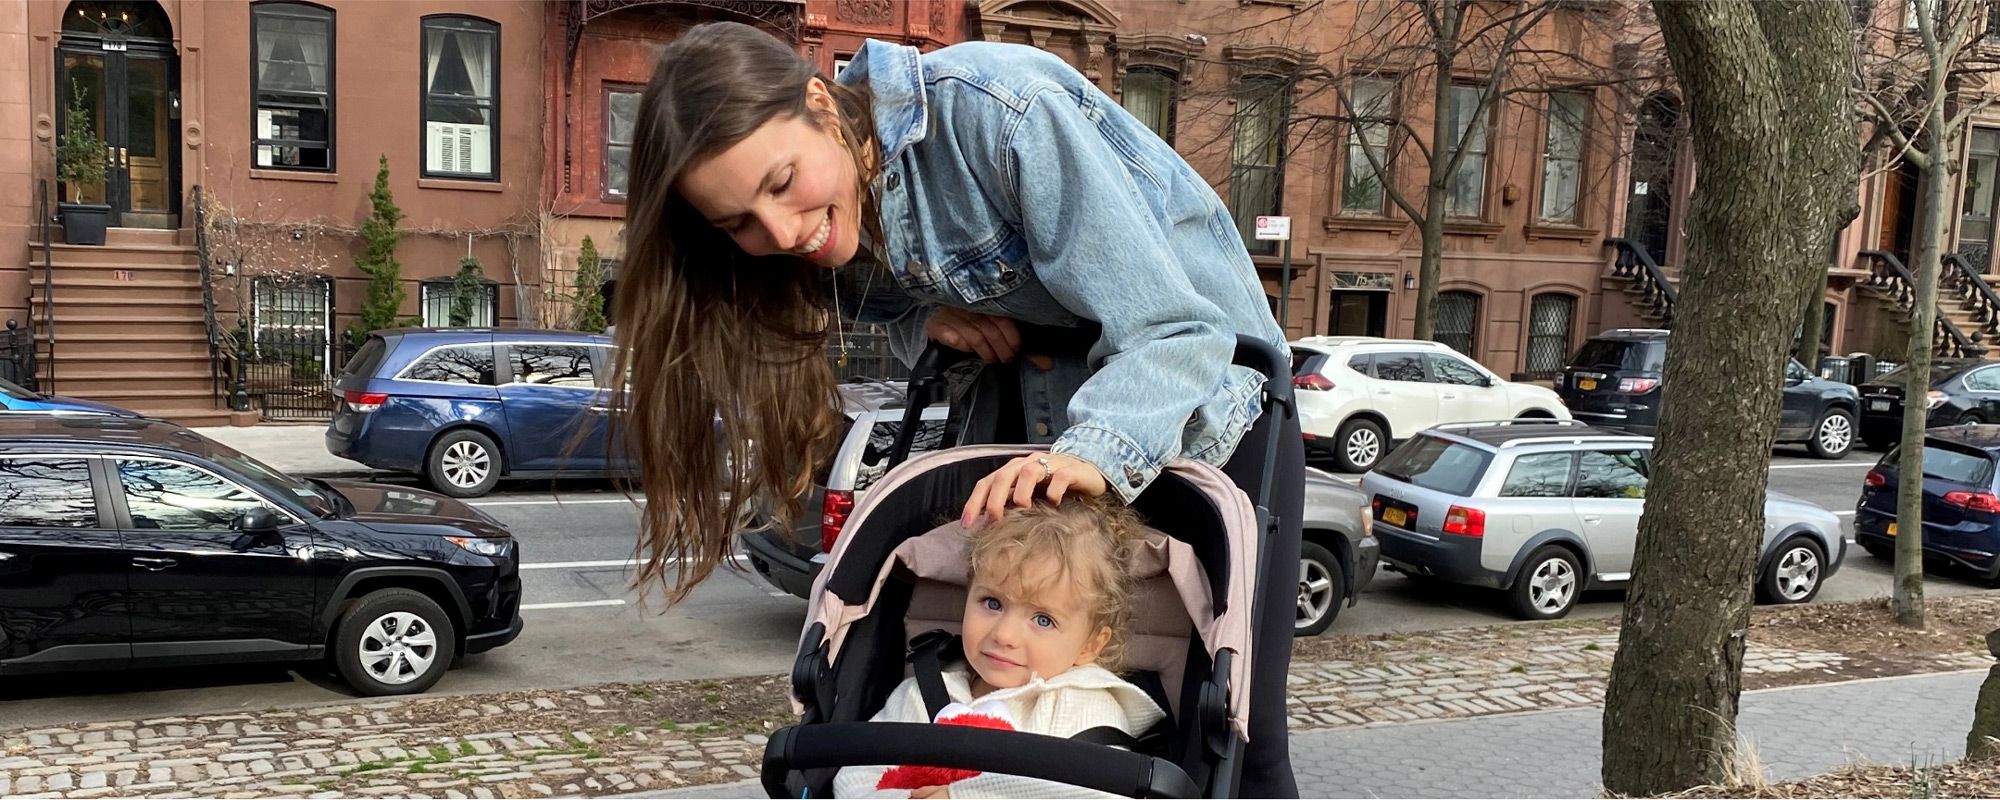 Olesia Anisimovich standing with her daughter in a Thule Spring stroller.